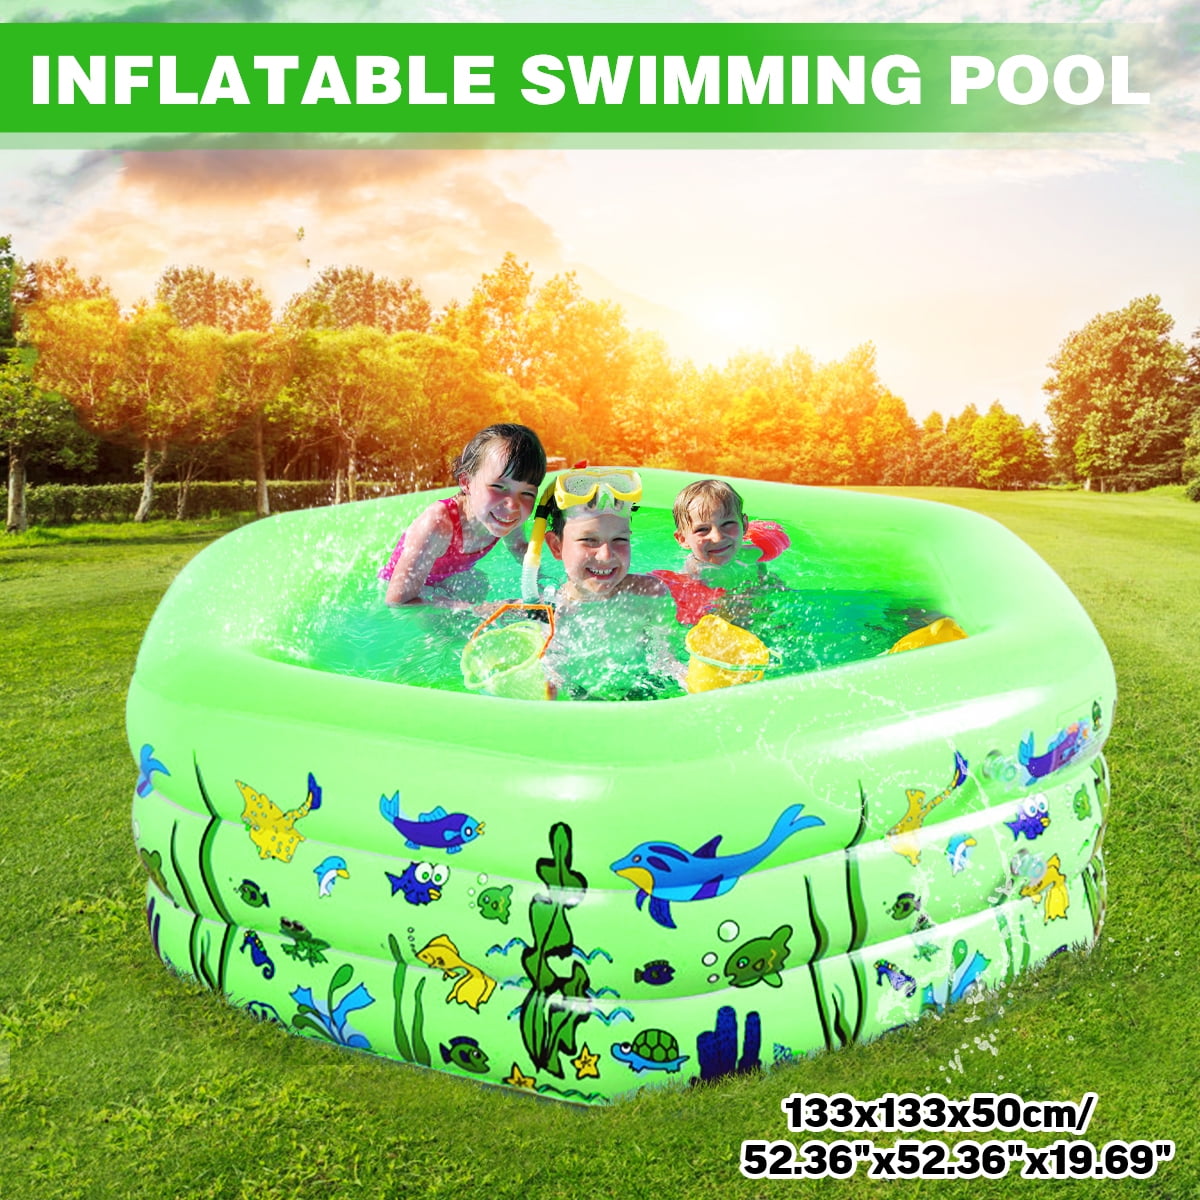 H2O GO Metallic 3 Ring Inflatable Kids Pool Brand New and Sealed for ages 6+ 